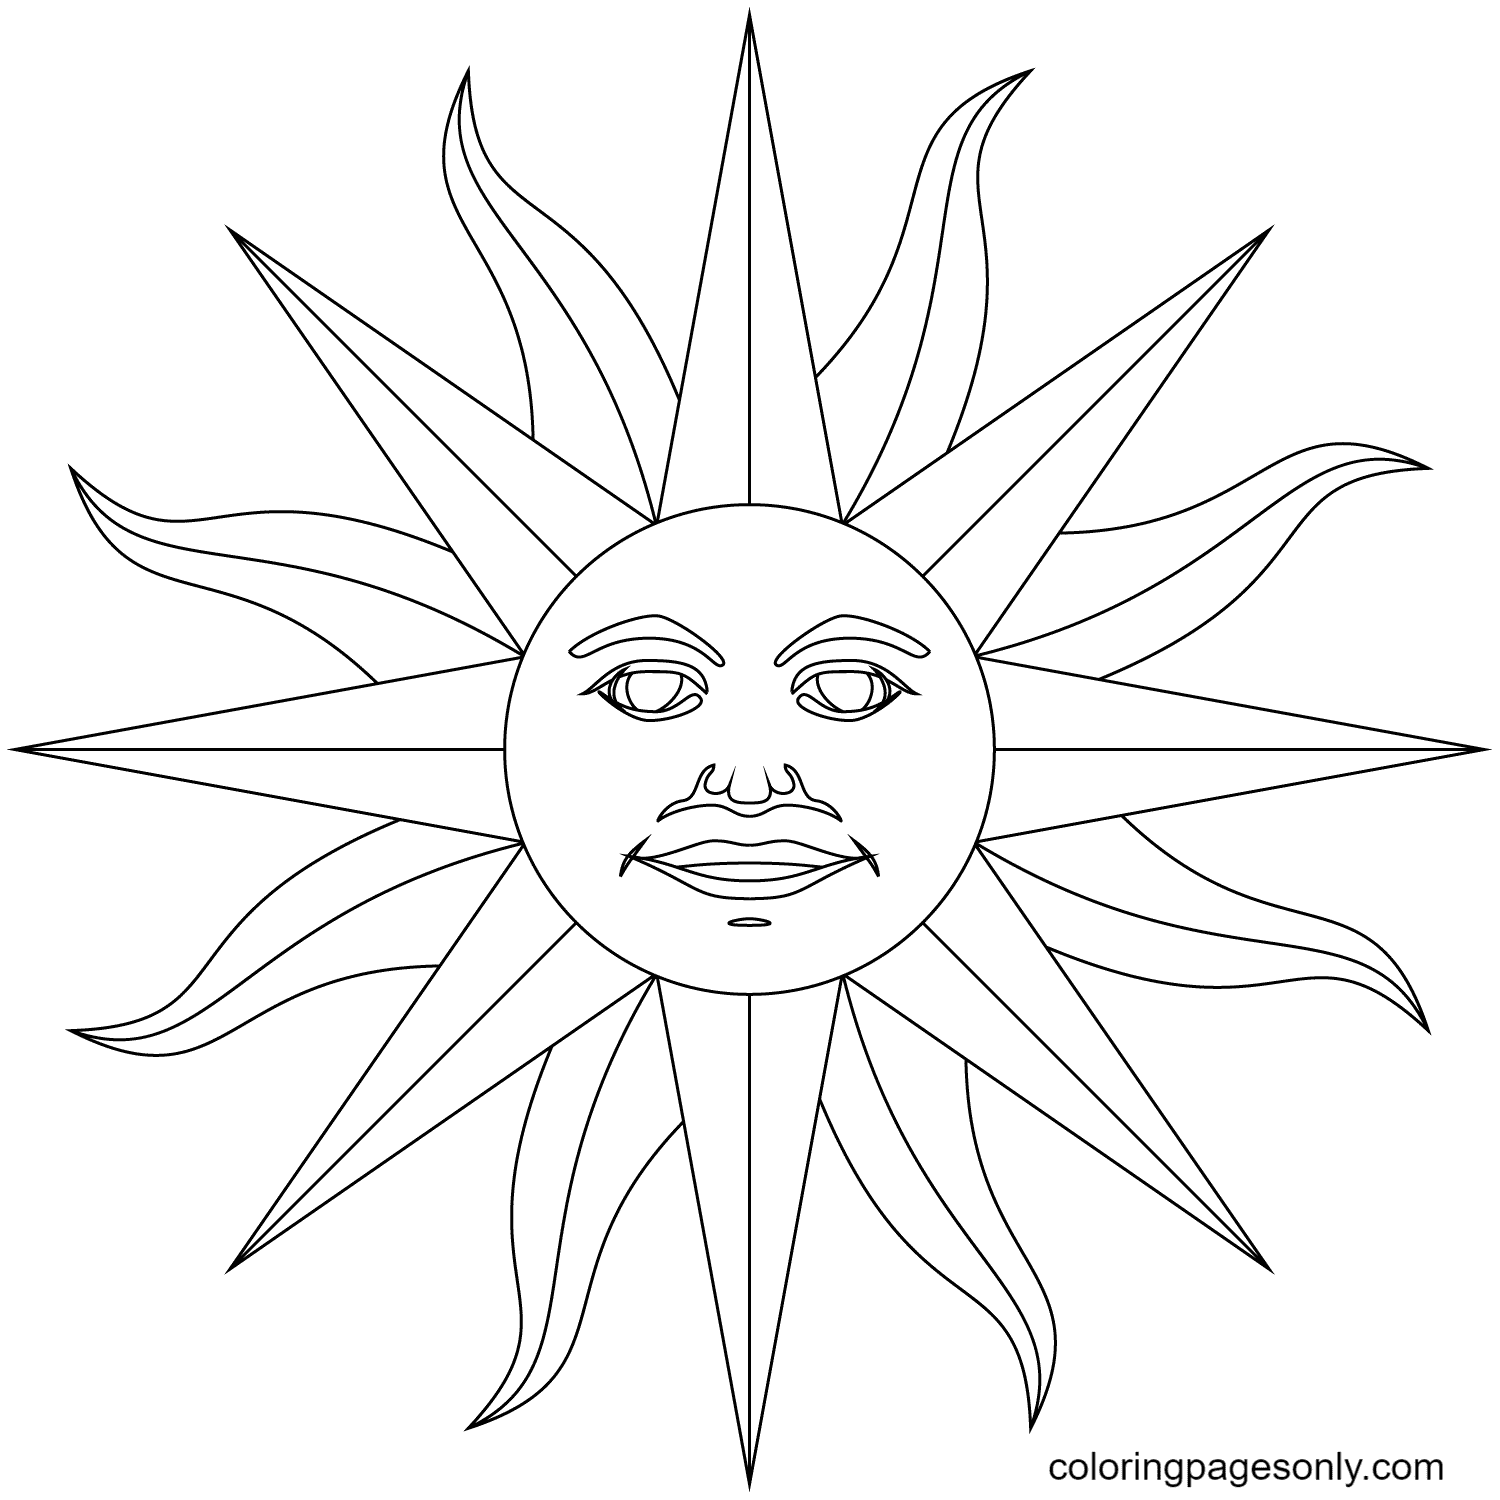 Inti – Incan God of Sun Coloring Pages